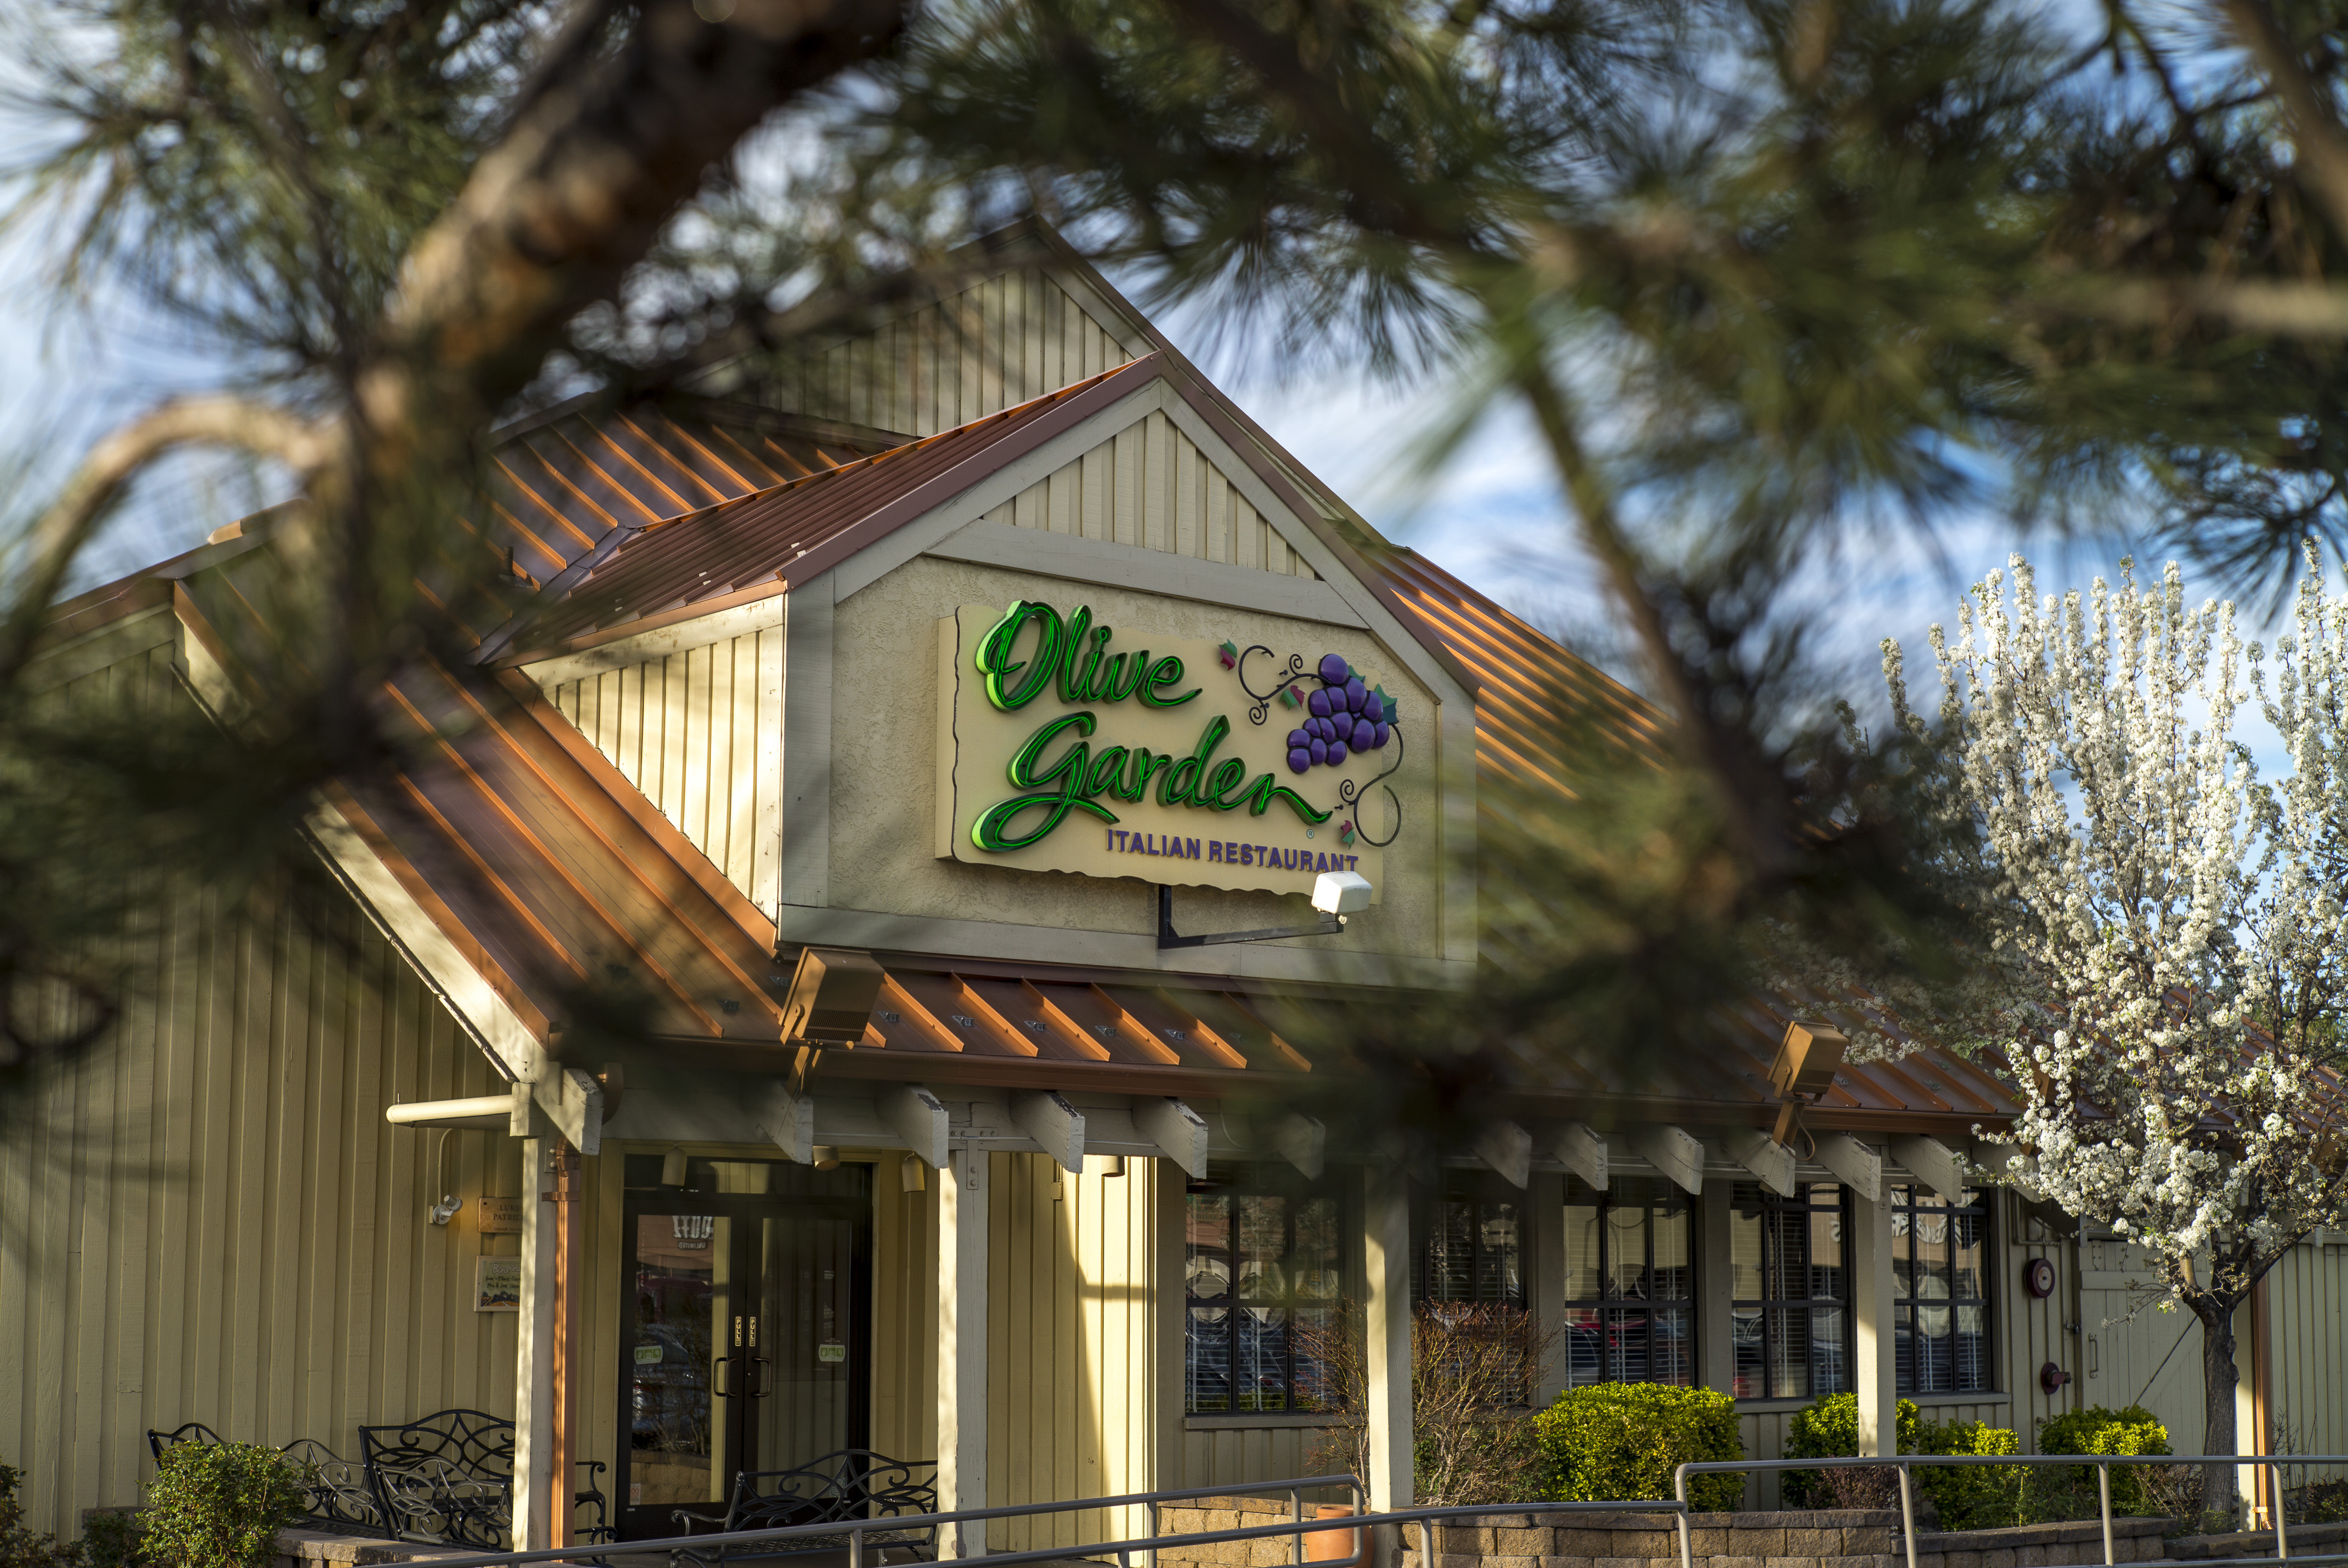 An Olive Garden in Reno, Nevada on March 19, 2015. (David Paul Morris—Bloomberg/Getty Images)